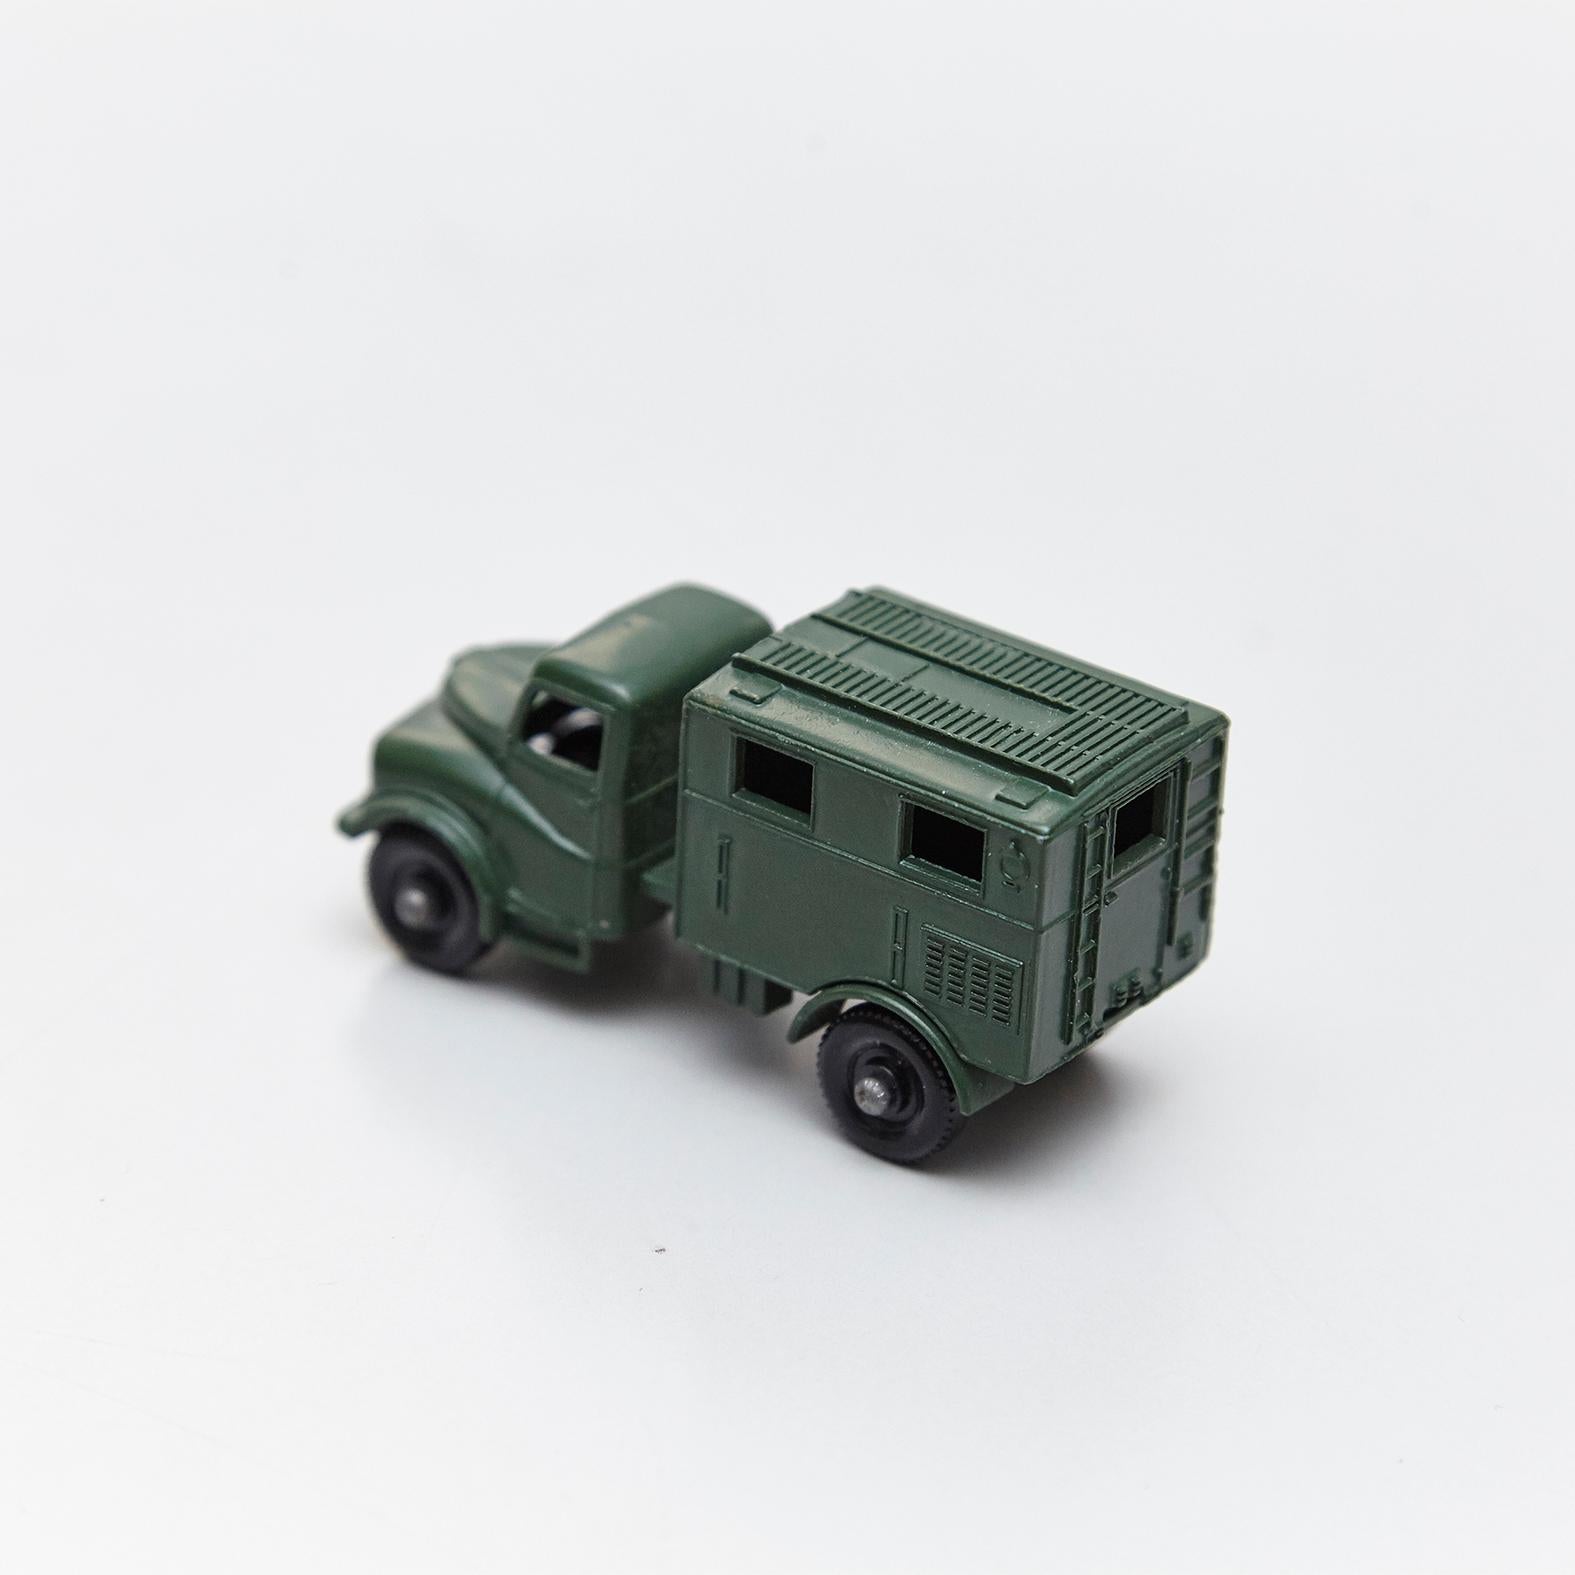 Lesney Matchboxes Series Antique Metal Toy Cars Green Military - Free Shipping 5